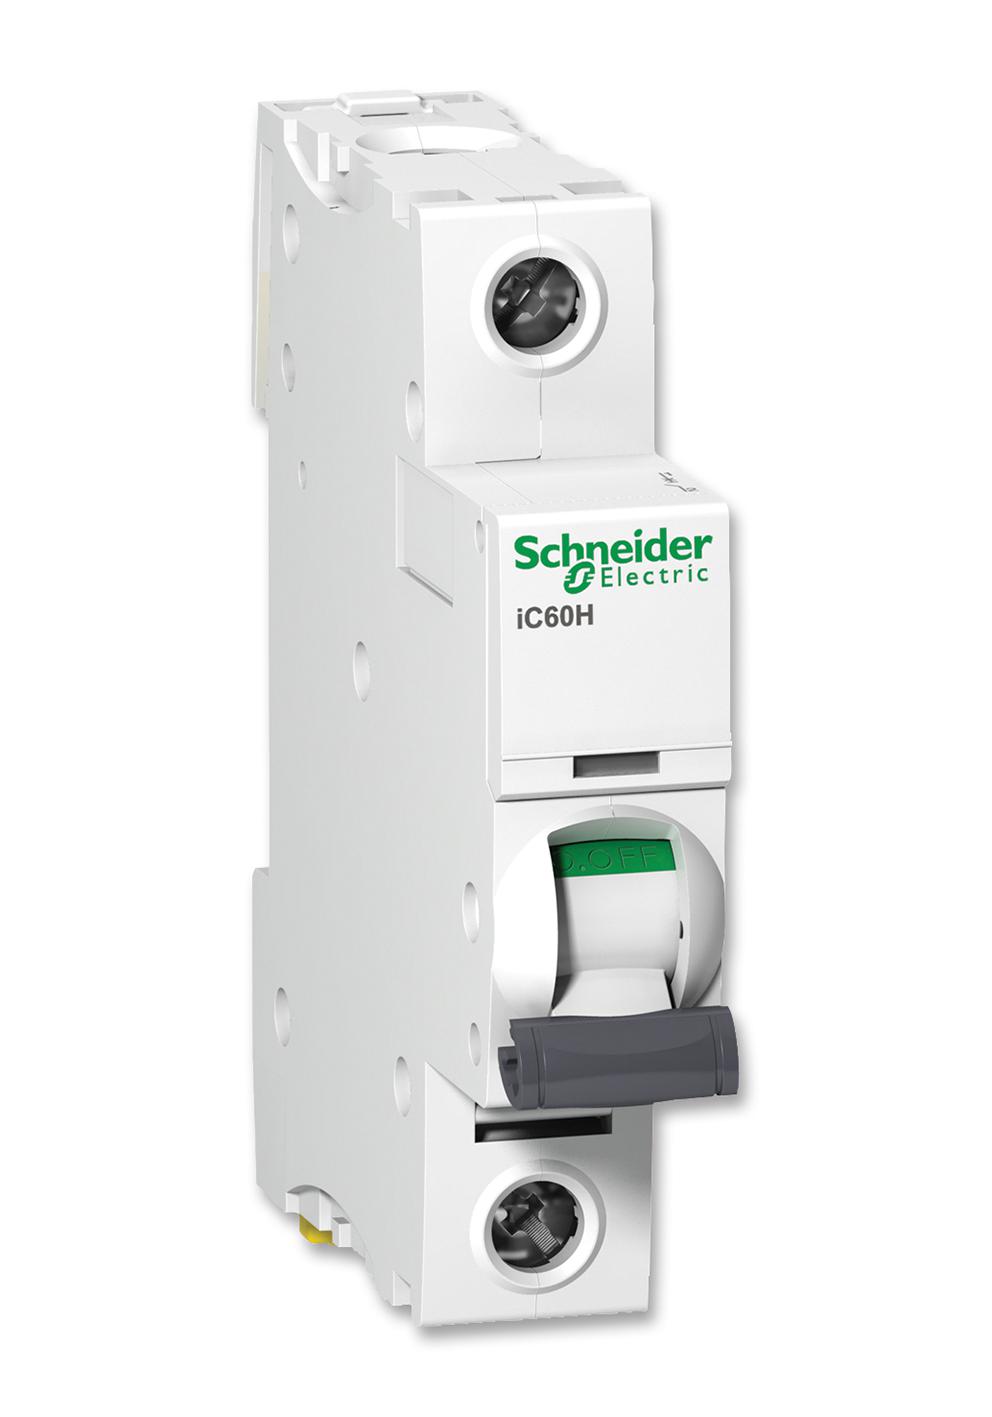 A9F54106 CIRCUIT BREAKER, THERMAL MAGNETIC, 1POLE SCHNEIDER ELECTRIC